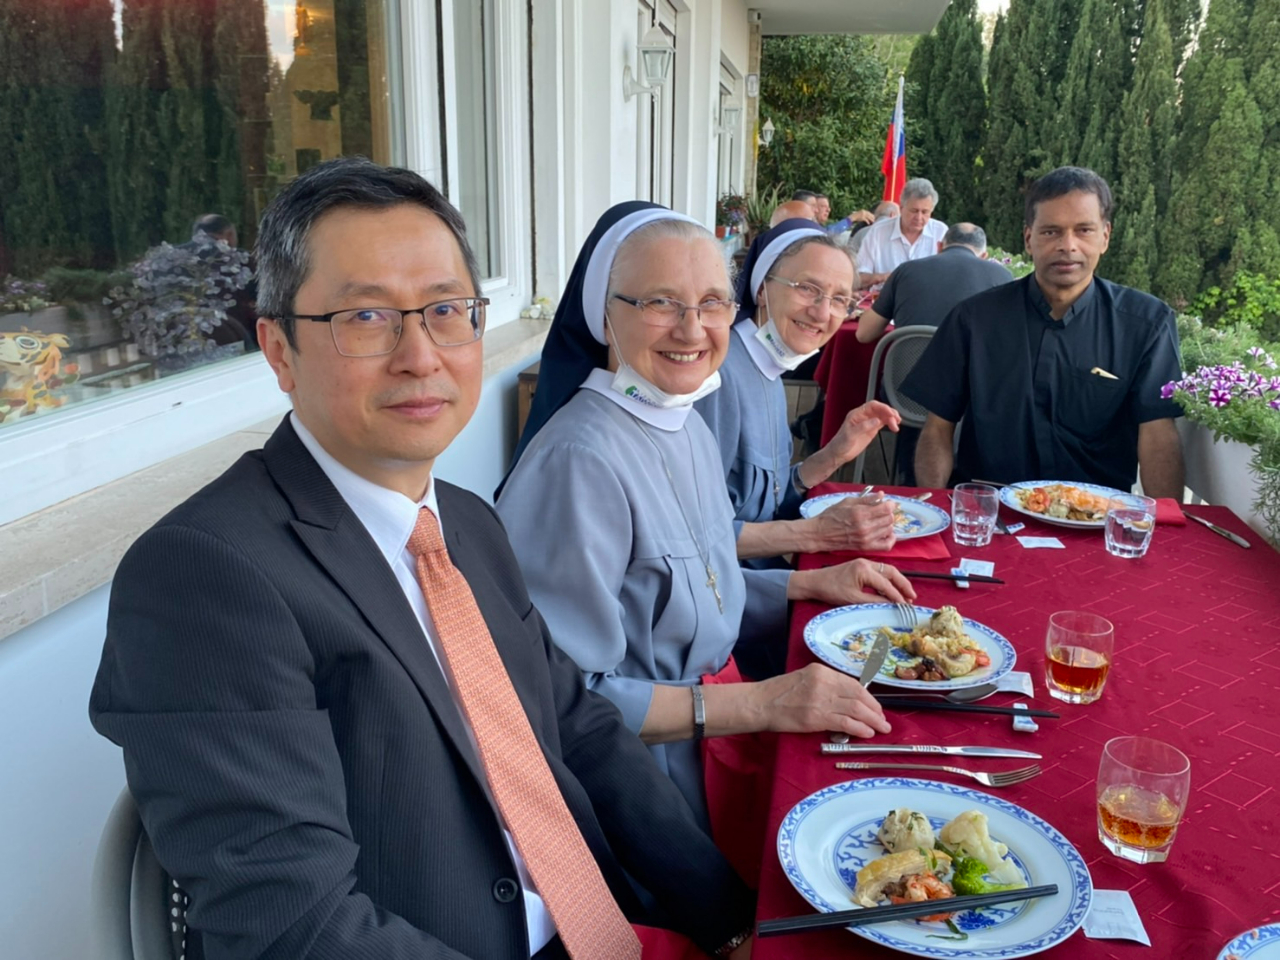 Ambassador Lee was delighted to welcome members of the College of confessors at St. Peter’s Basilica to his residence for a dinner.